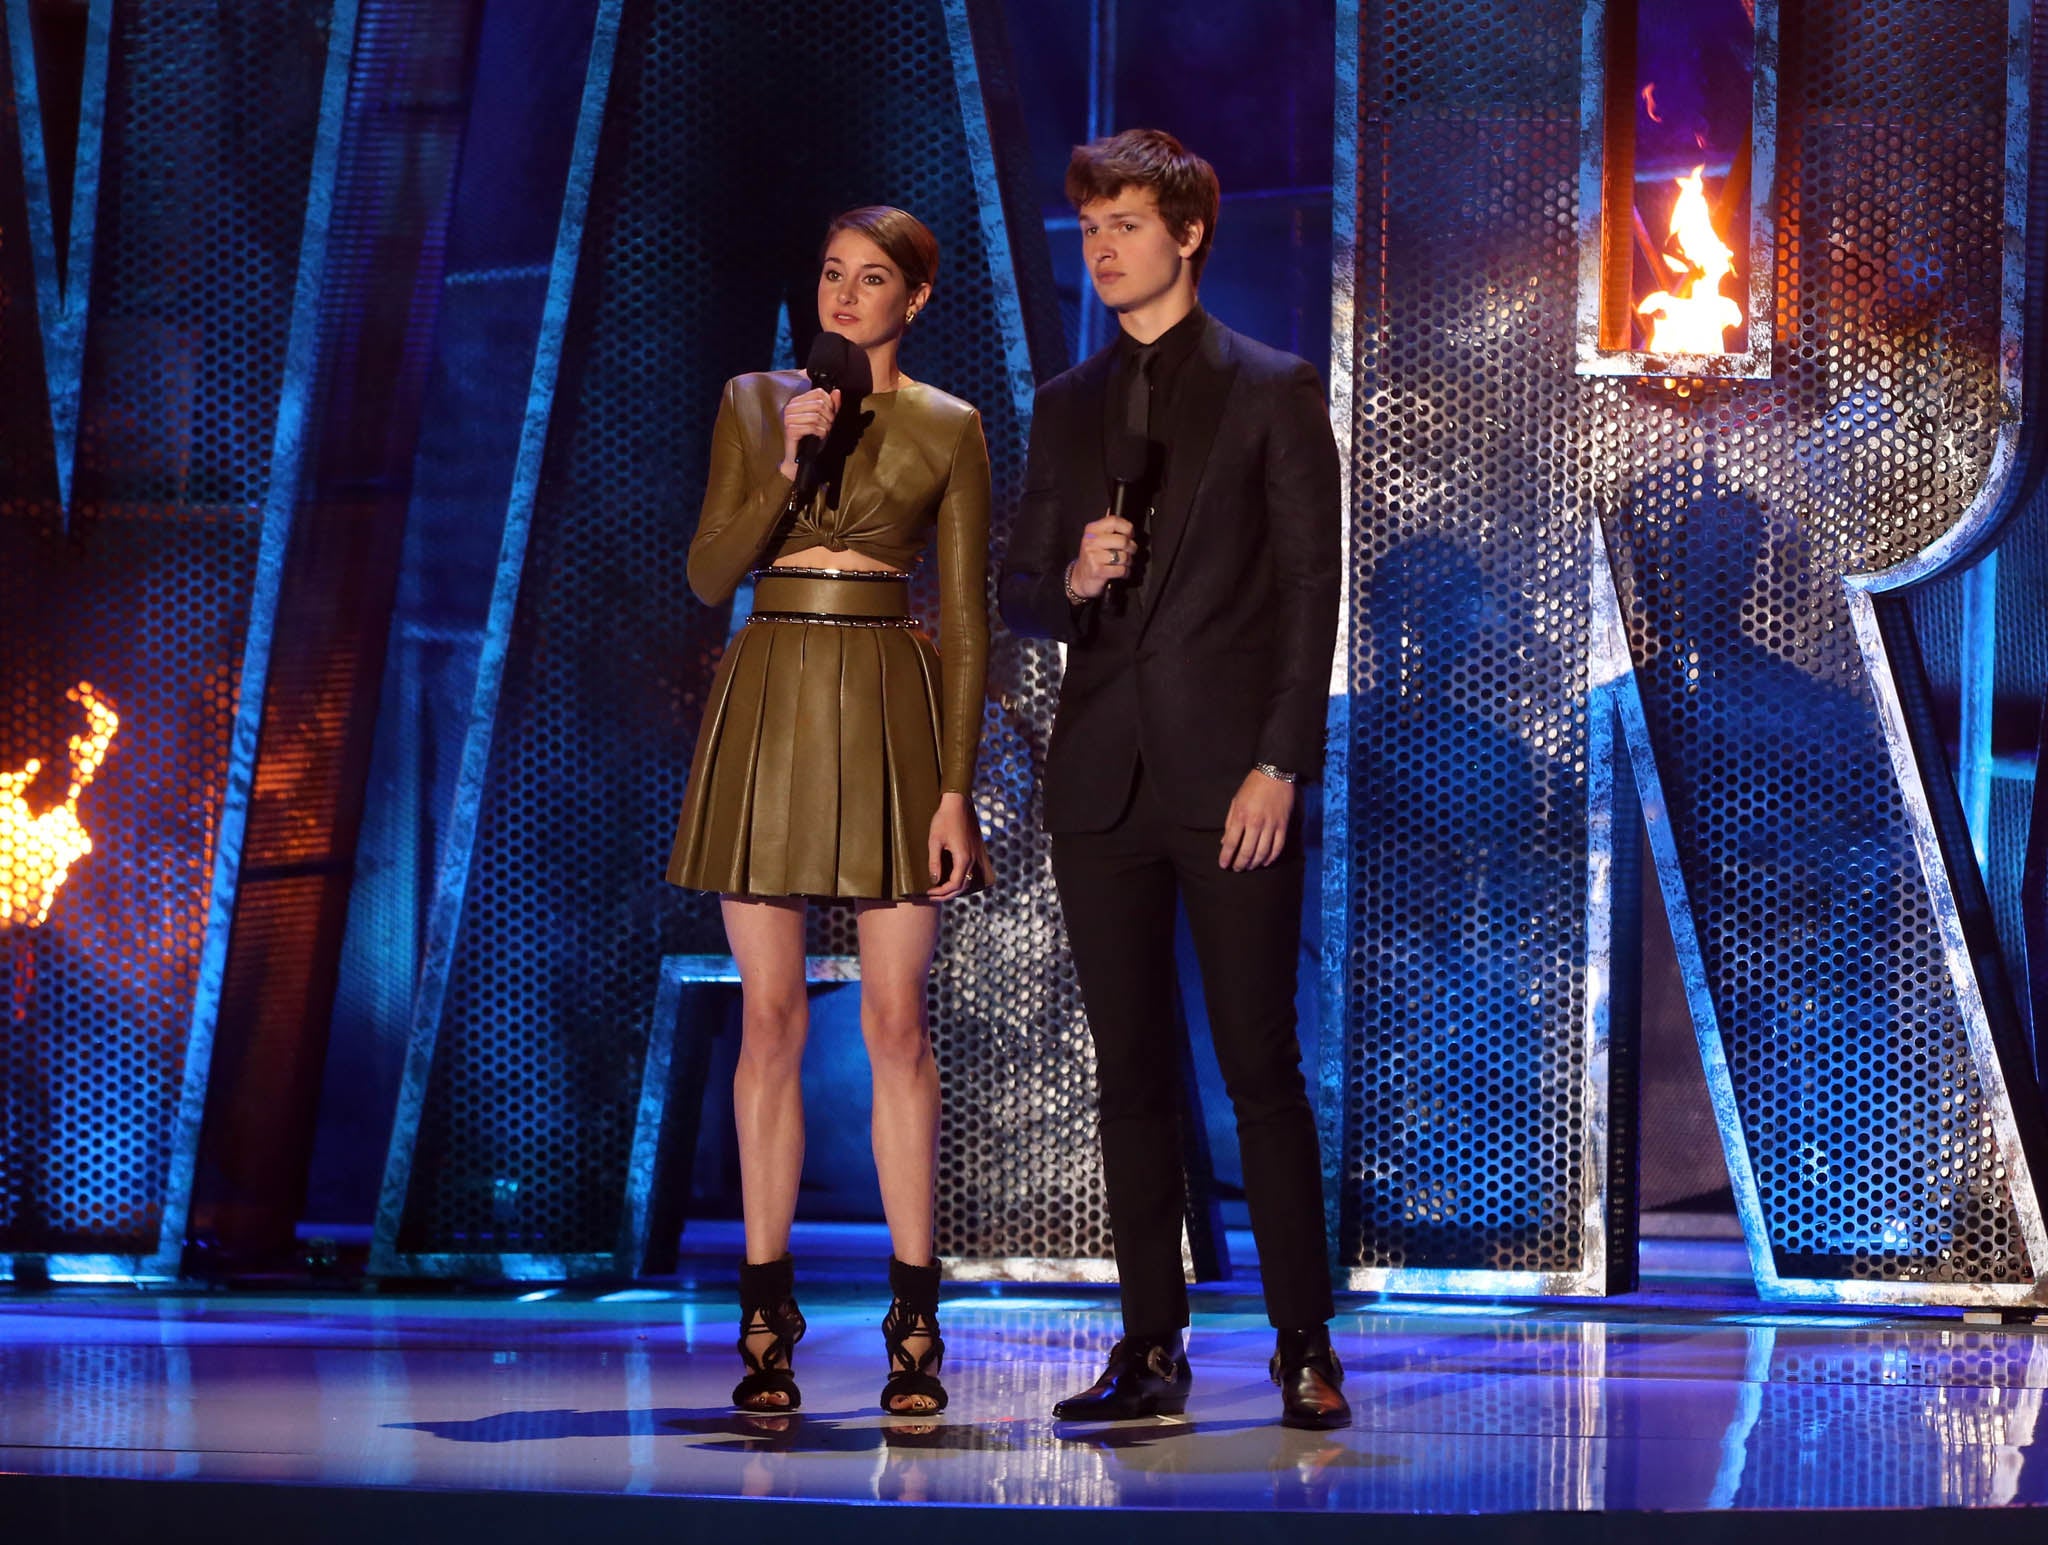 Actors Shailene Woodley (L) and Ansel Elgort speak onstage at the 2014 MTV Movie Awards